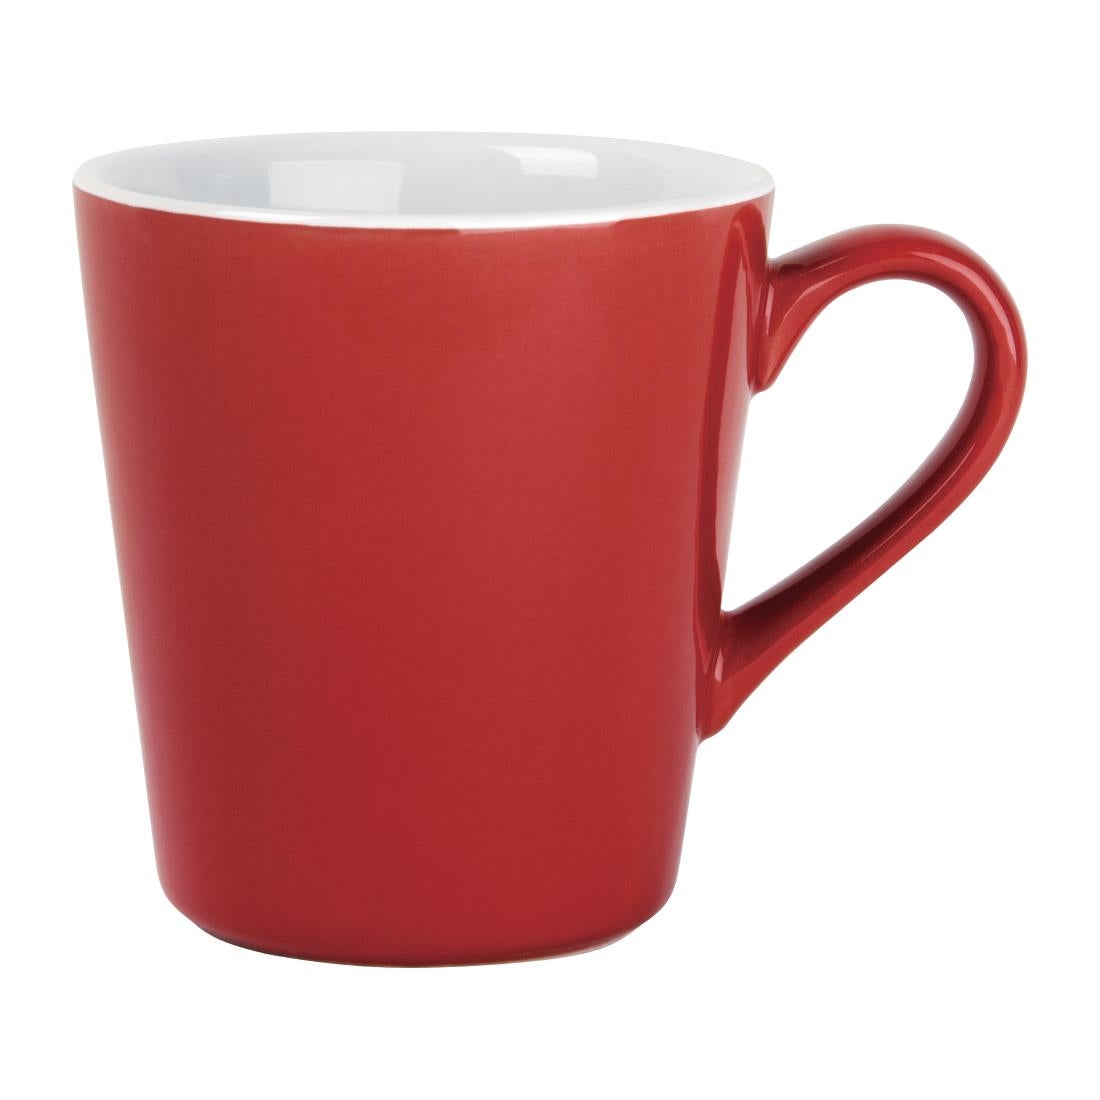 FF990 Olympia Cafe Flat White Red - 170ml 5.74fl oz (Box 12) JD Catering Equipment Solutions Ltd